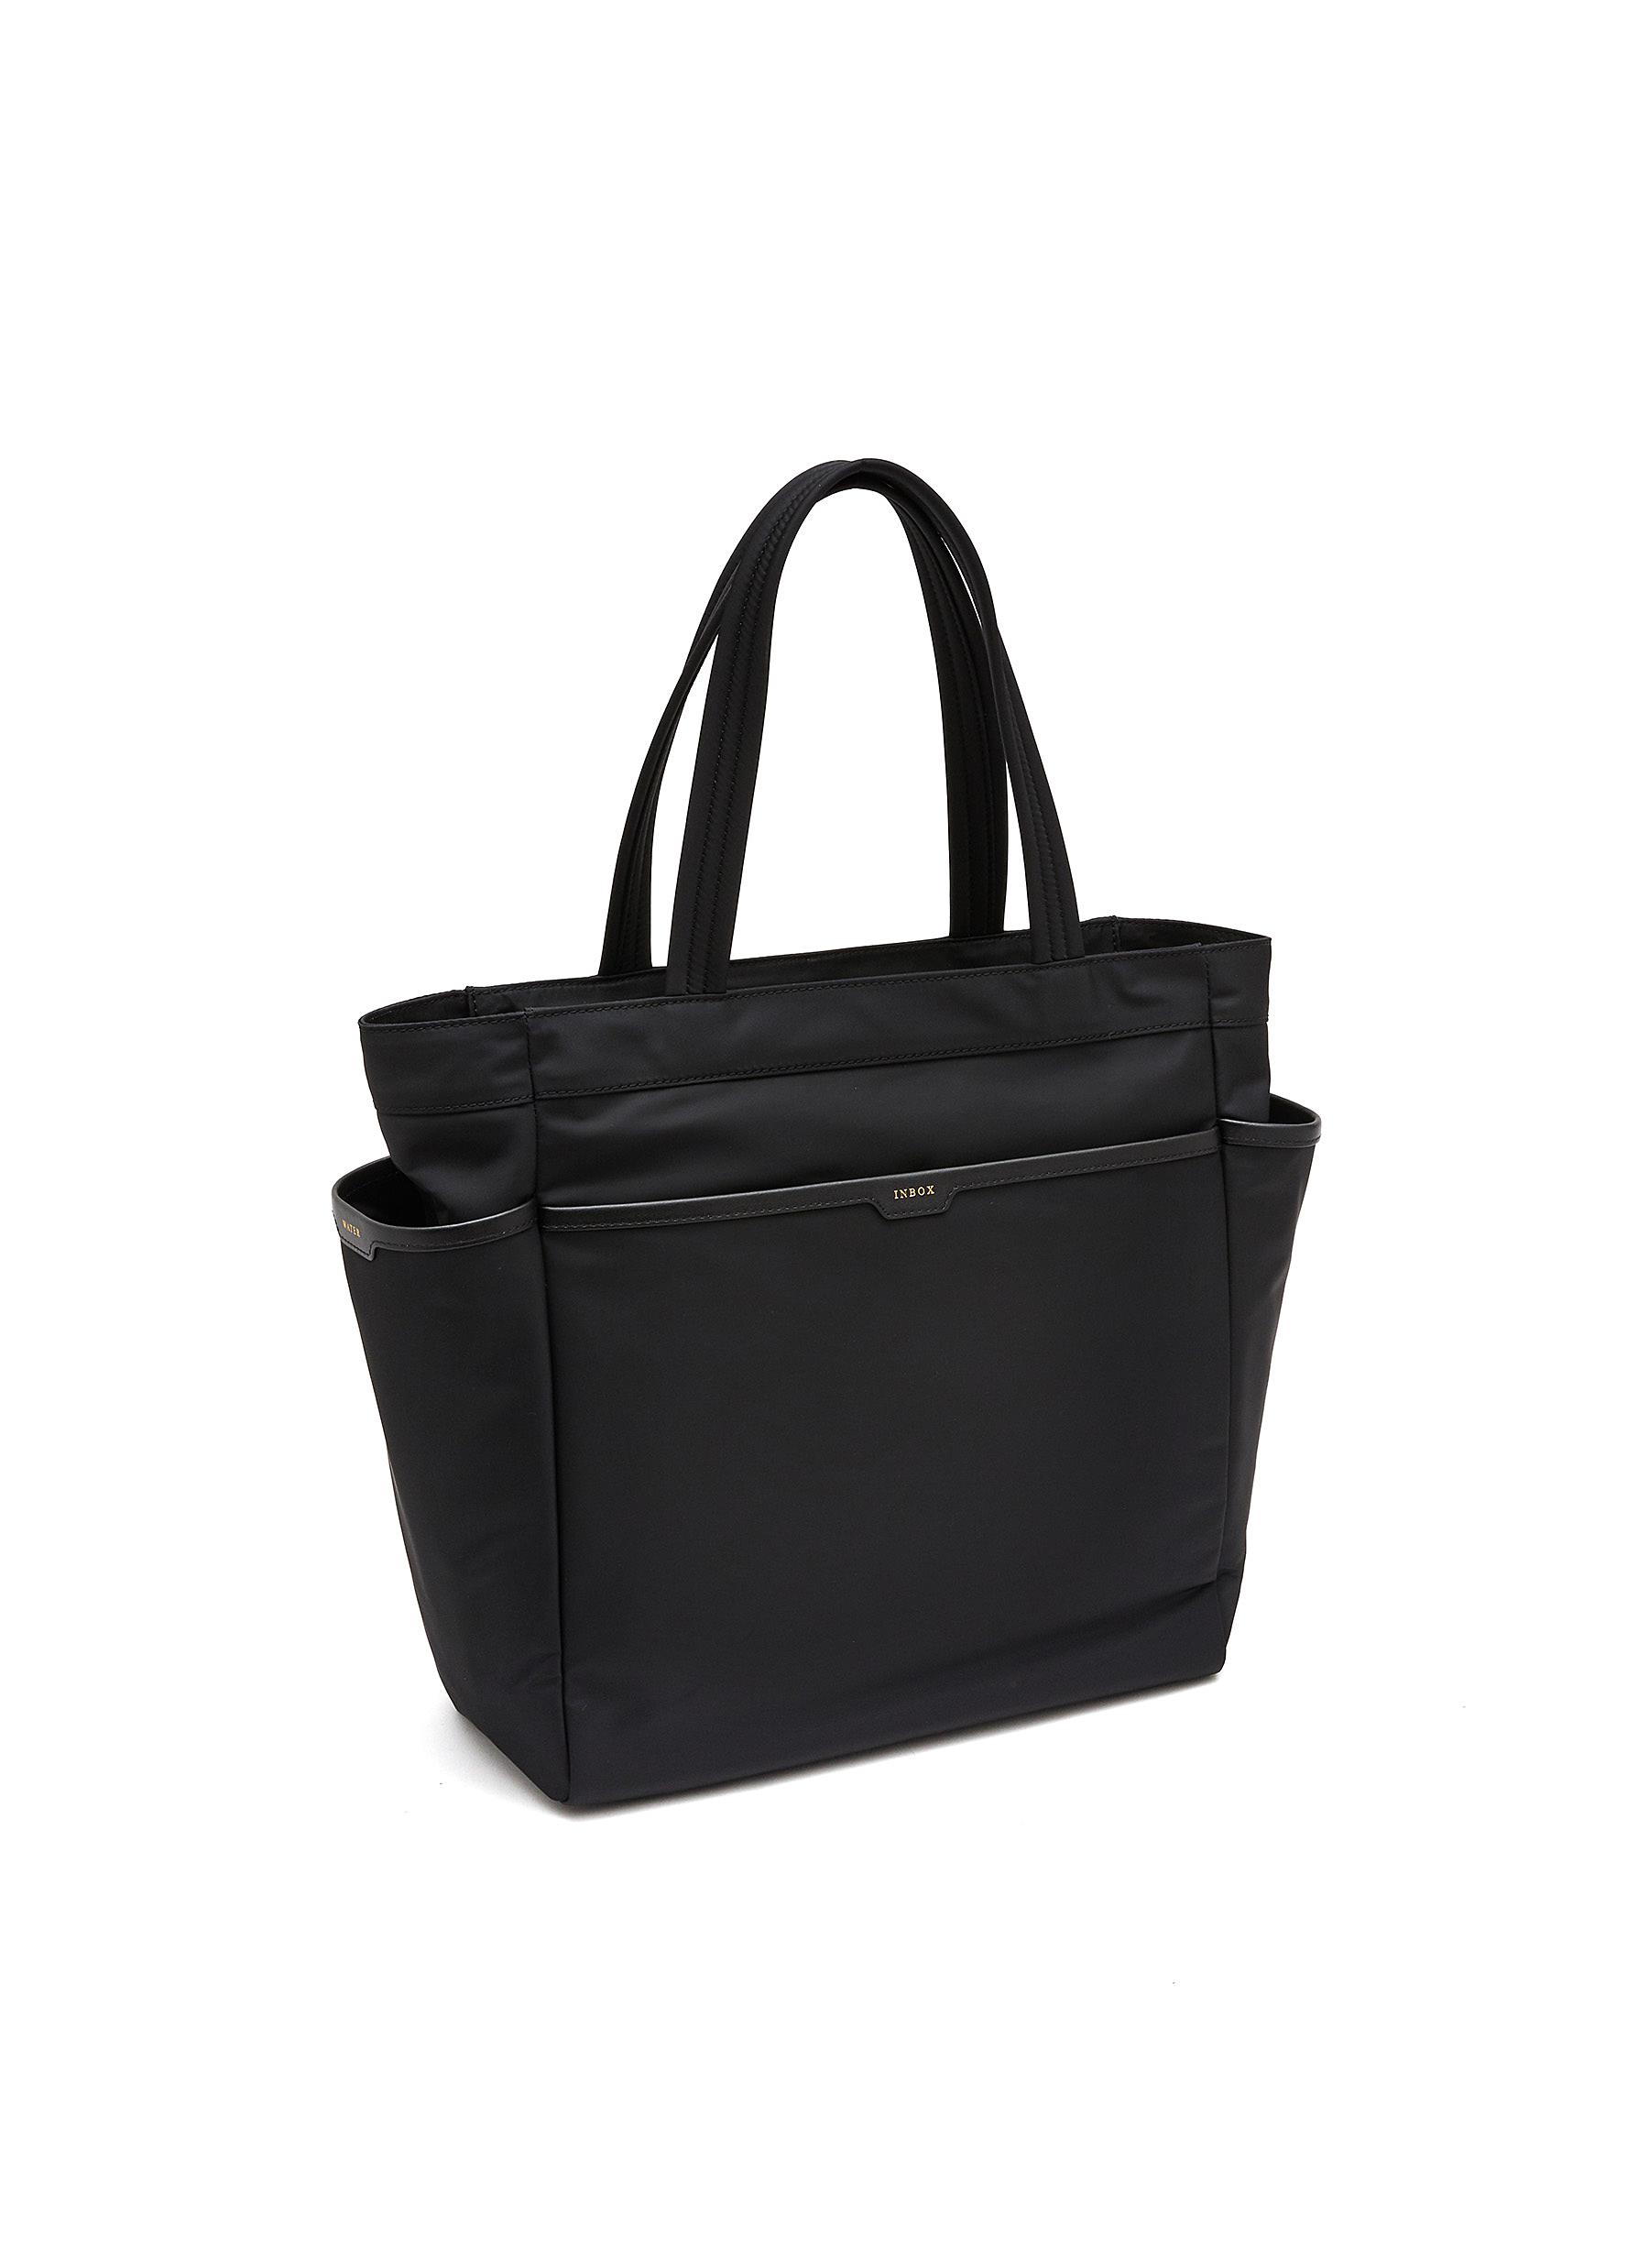 COMMUTER TOTE BAG